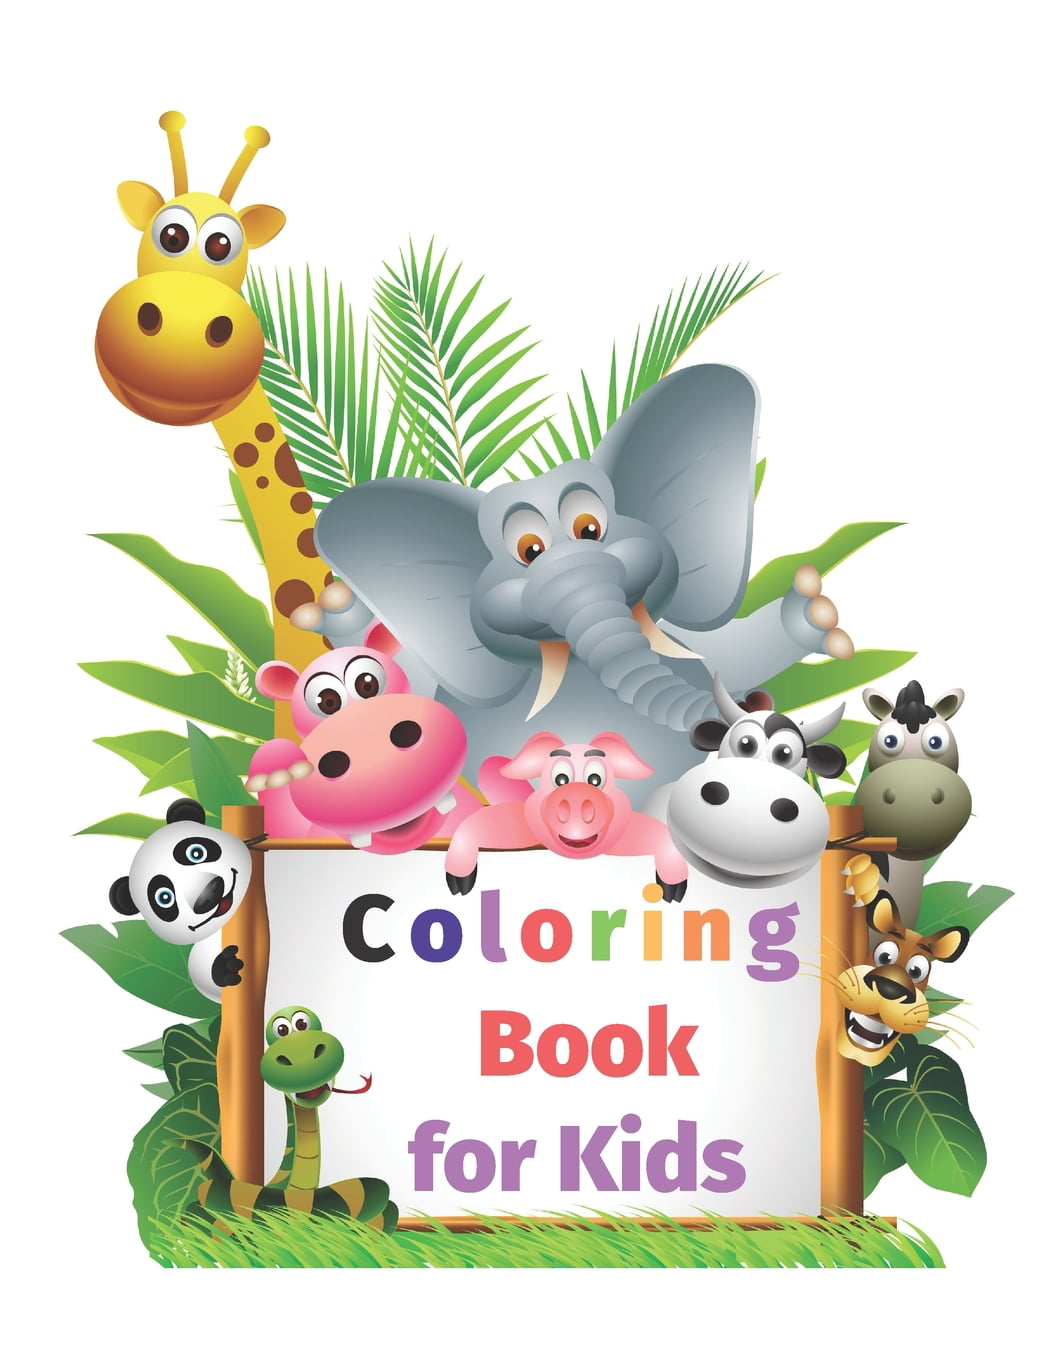 Coloring Book for Kids  Kids Coloring Books Animal Coloring Book For Kids  Aged 20 20, 20 20 Paperback